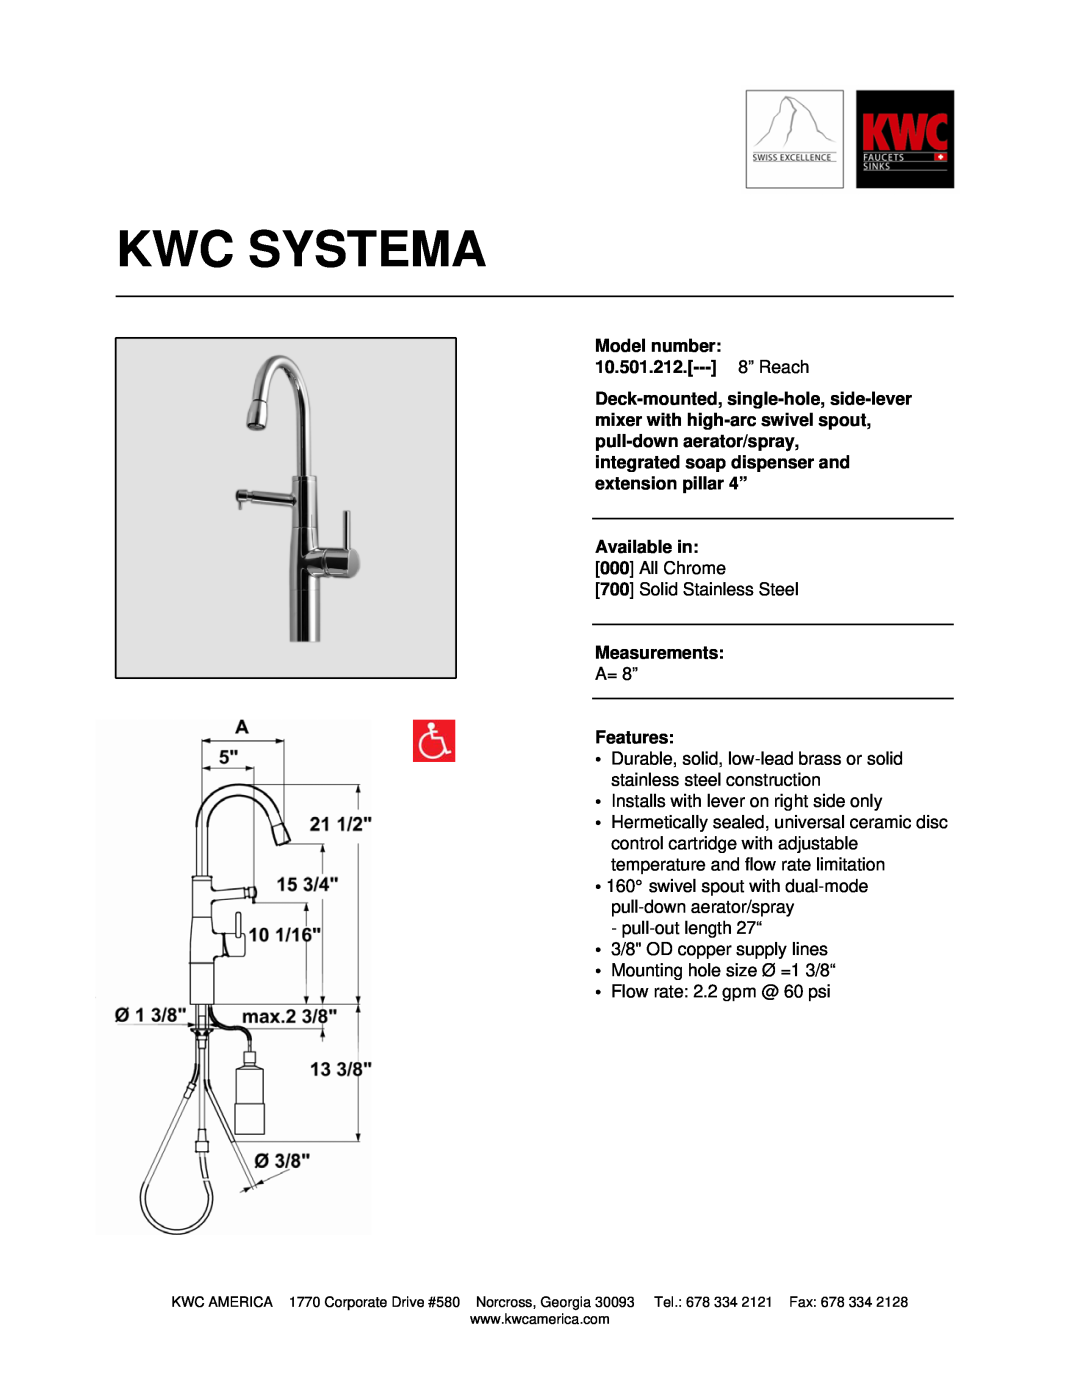 KWC manual Kwc Systema, Model number 10.501.212.--- 8” Reach, Available in, Measurements, Features 